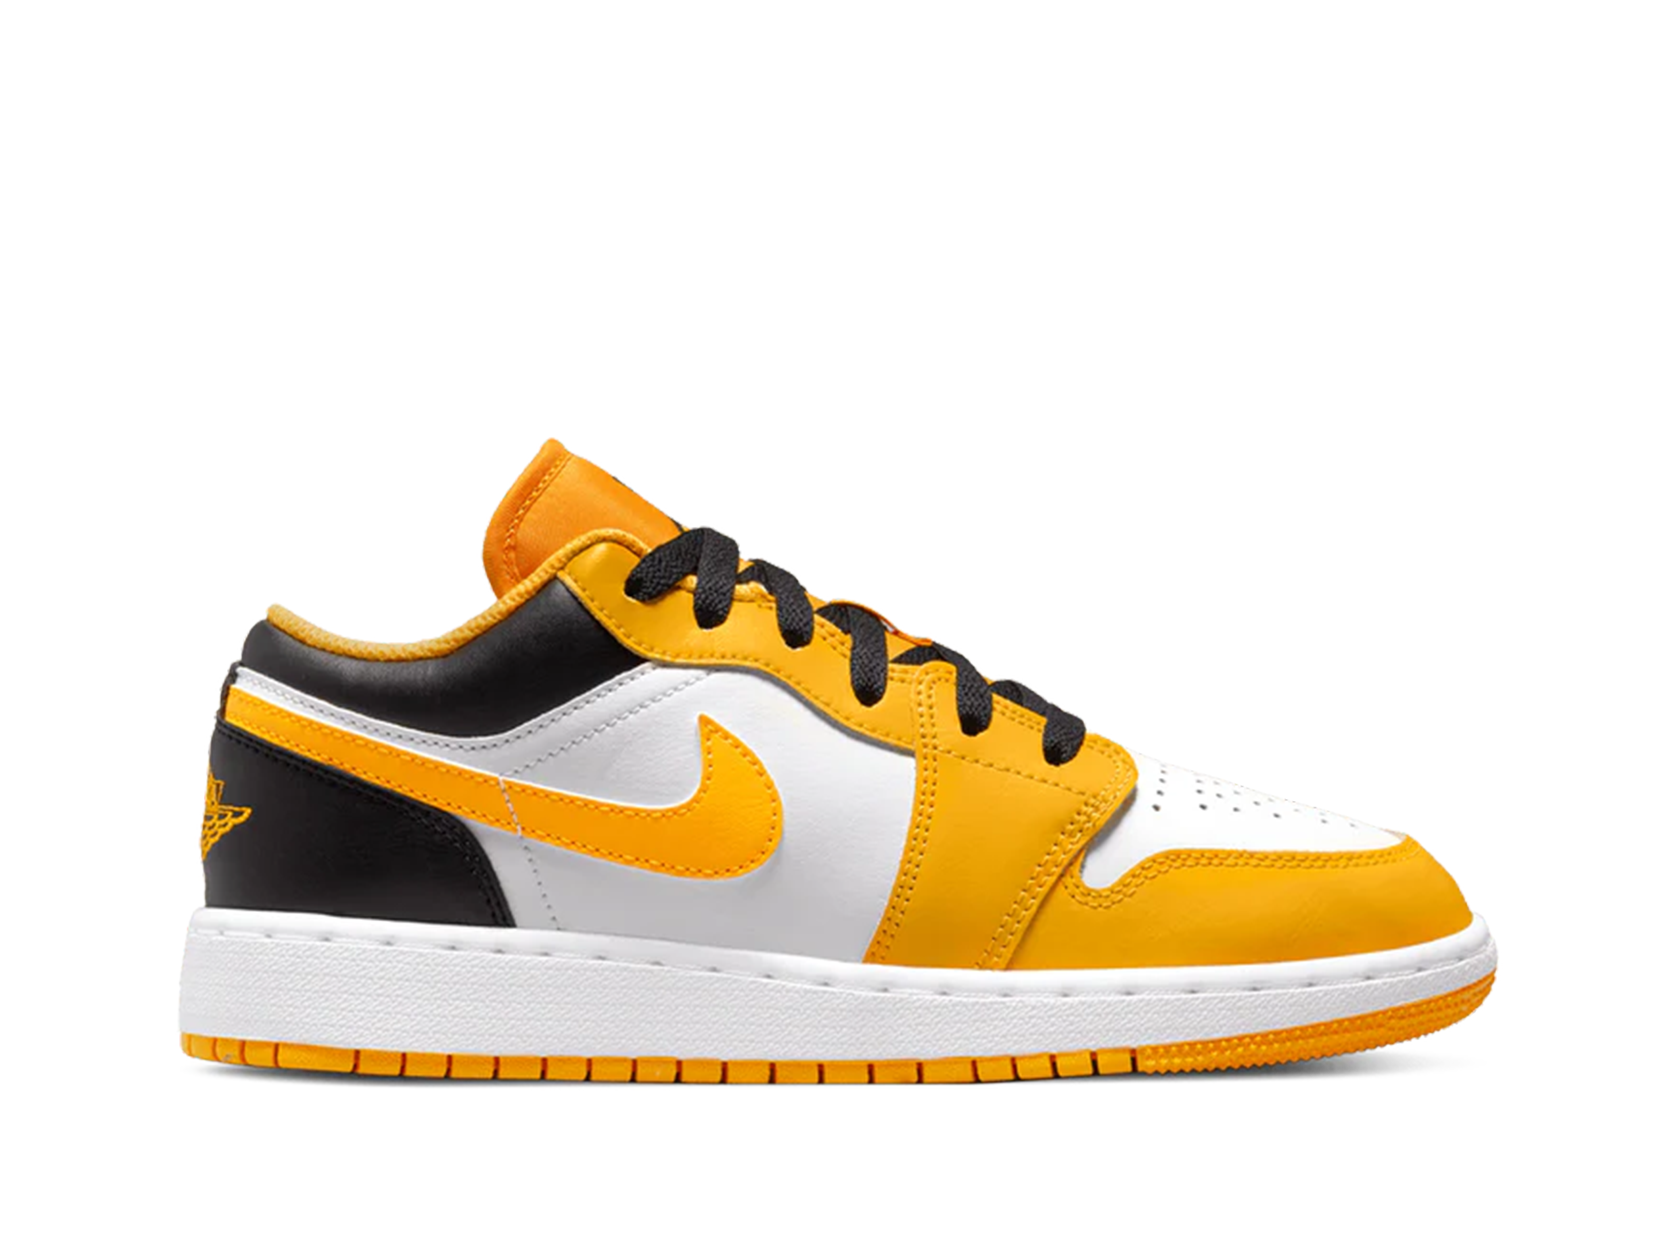 Double Boxed  149.99 Nike Air Jordan 1 Low Taxi Double Boxed